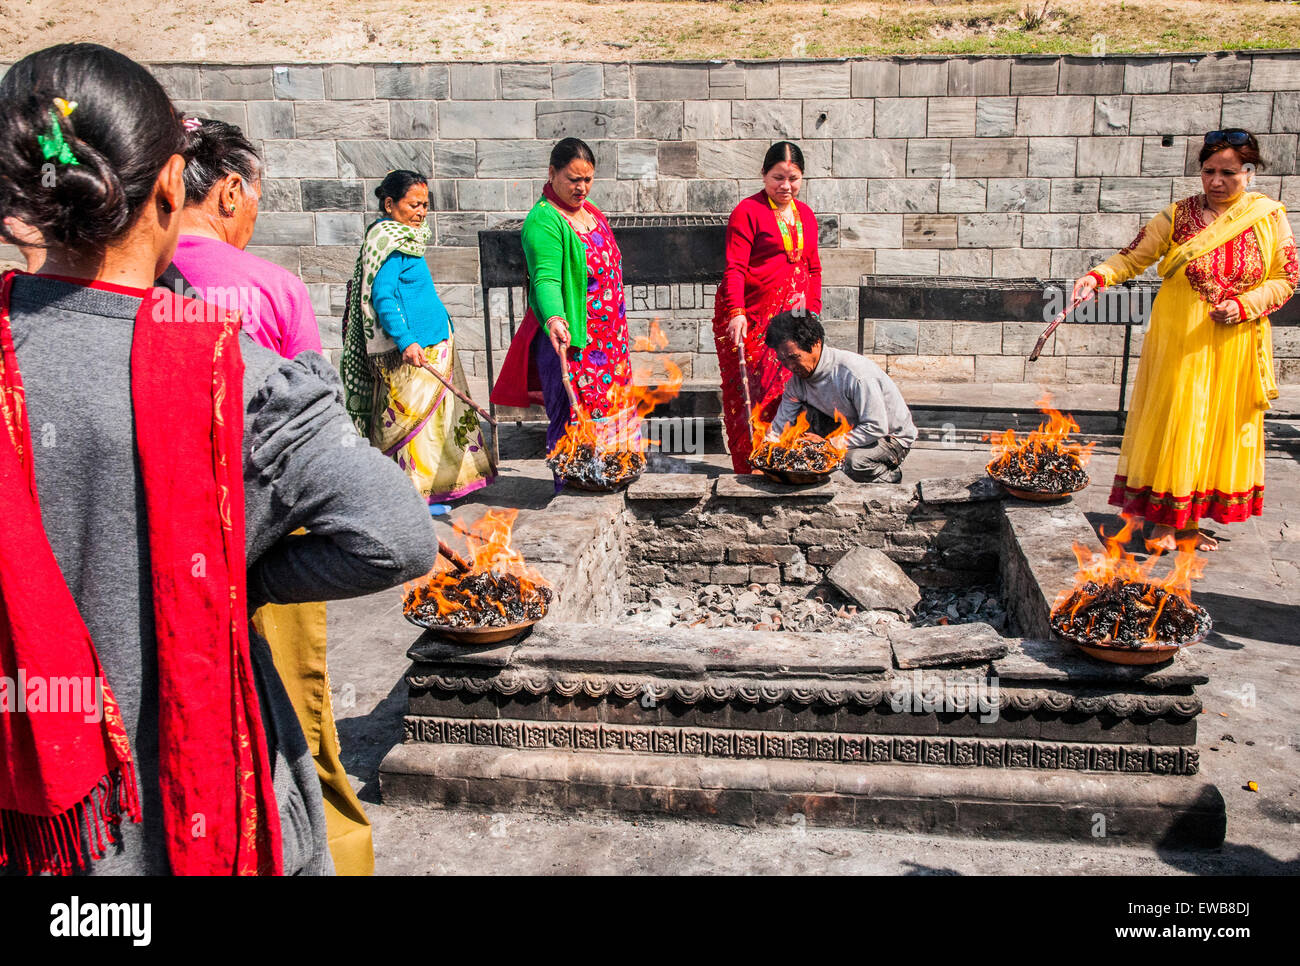 A pyre for a Hindu funeral at Pashupatinath Temple, a Hindu temple located on the banks of the Bagmati River. Kathmandu, Nepal Stock Photo